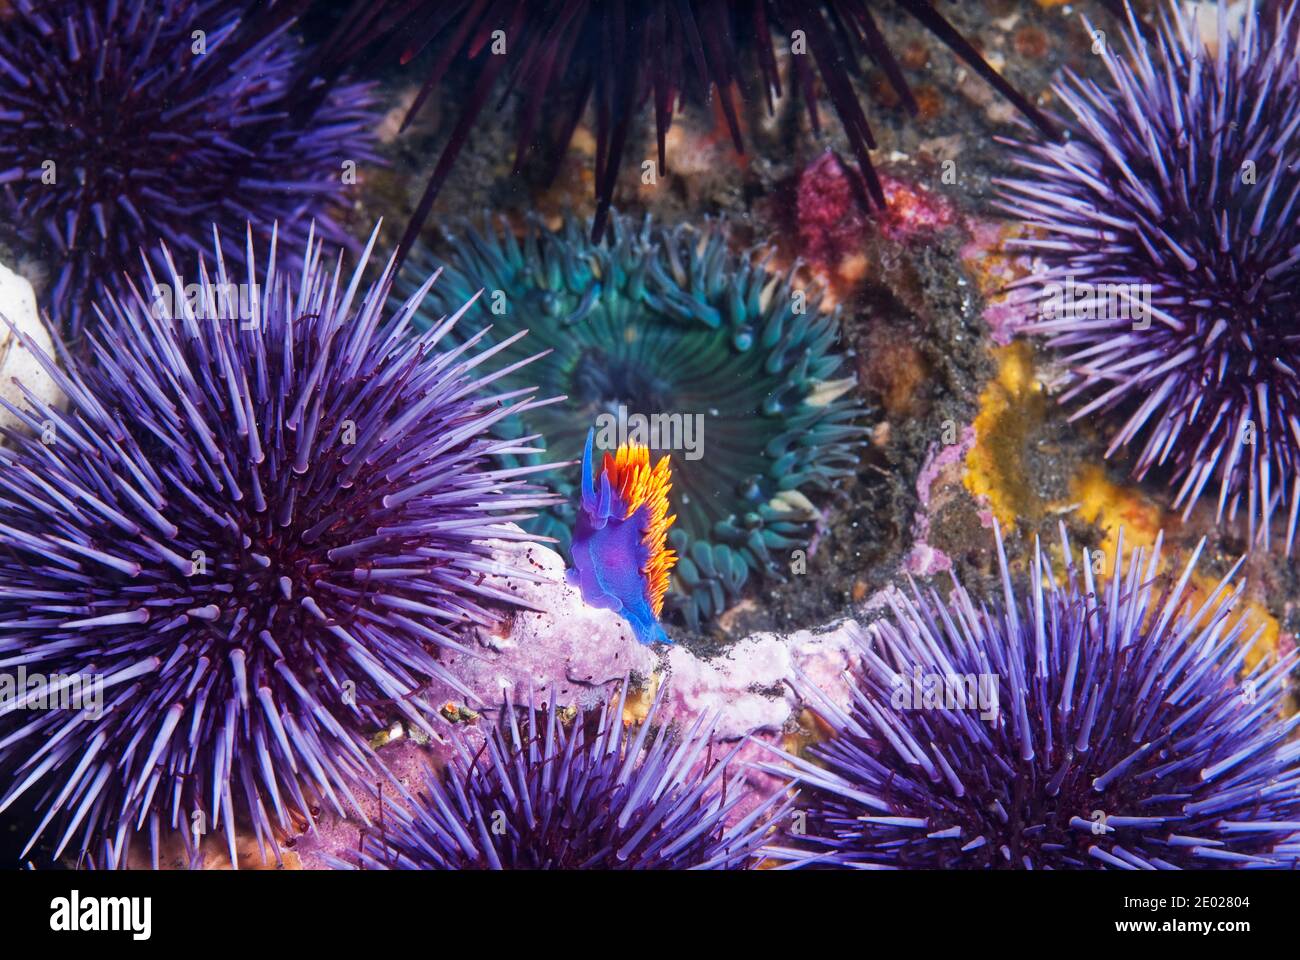 Spanish shawl nudibranch surrounded by sea urchin Stock Photo